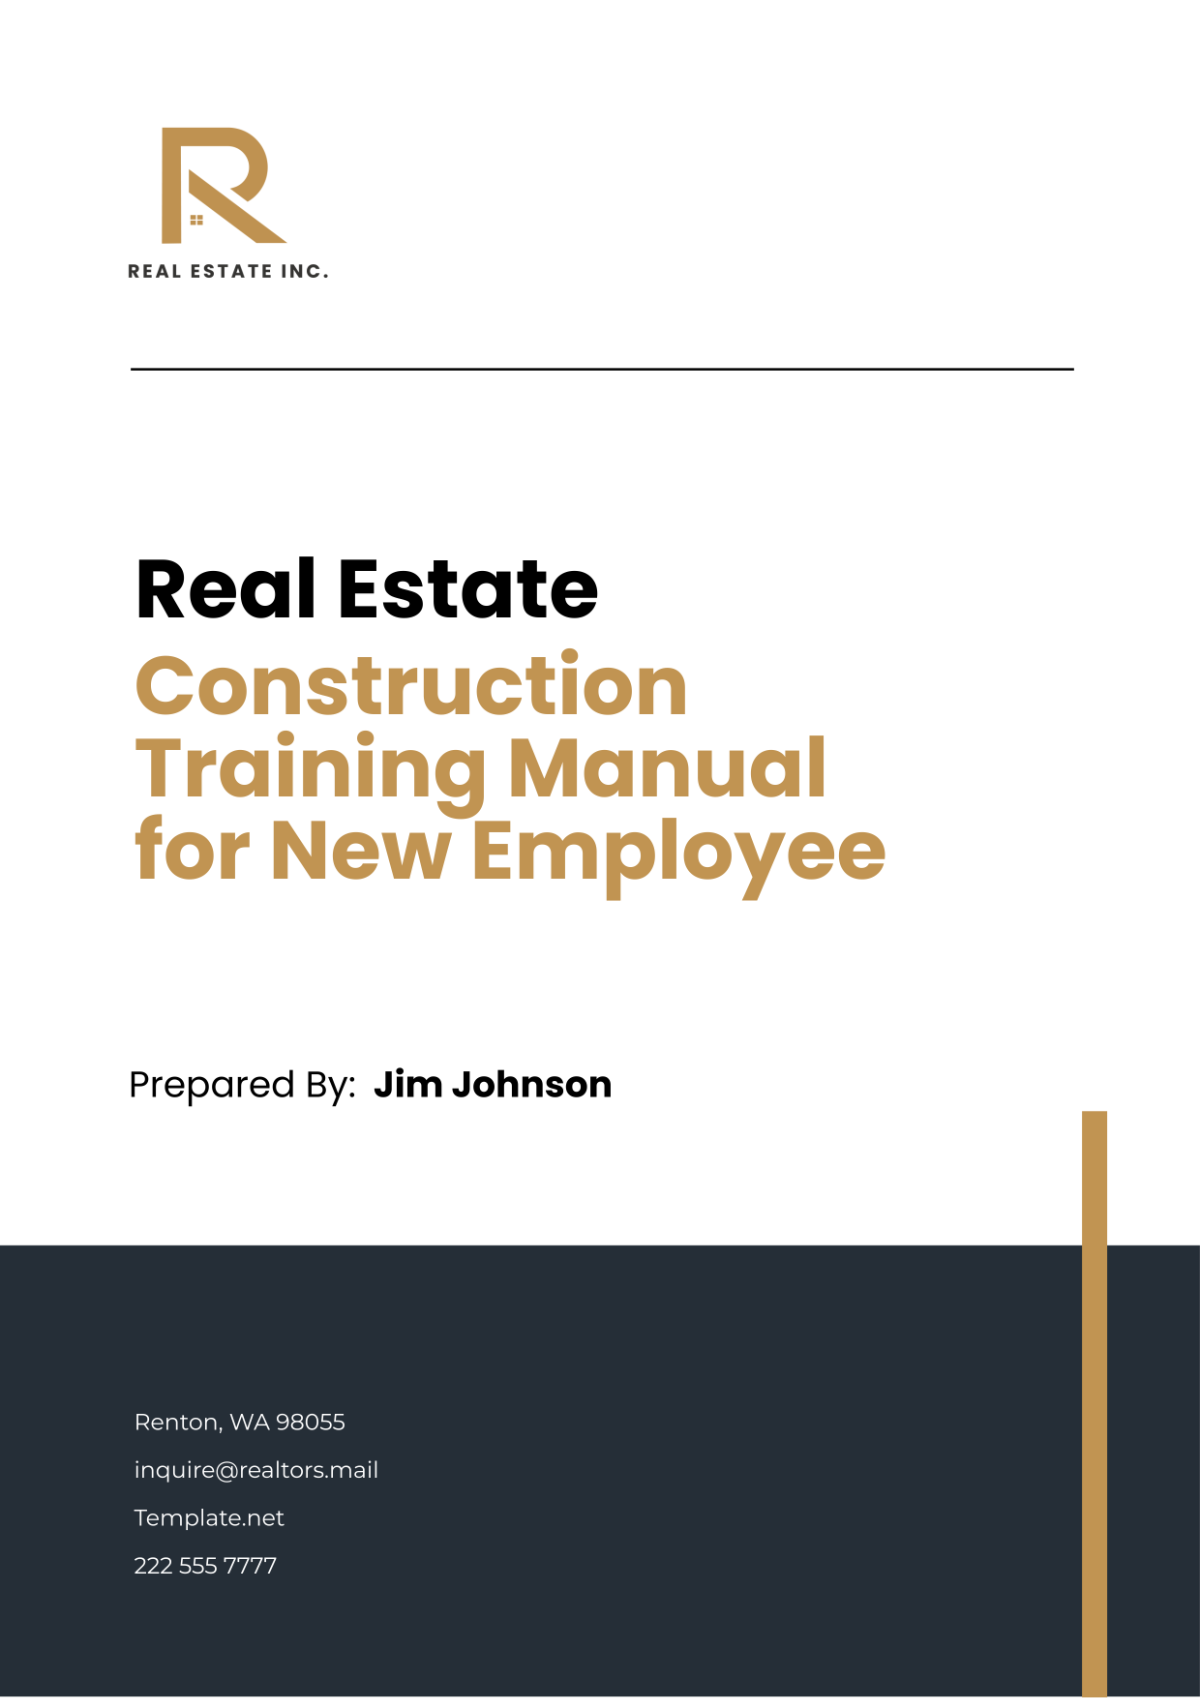 Real Estate Construction Training Manual for New Employees Template